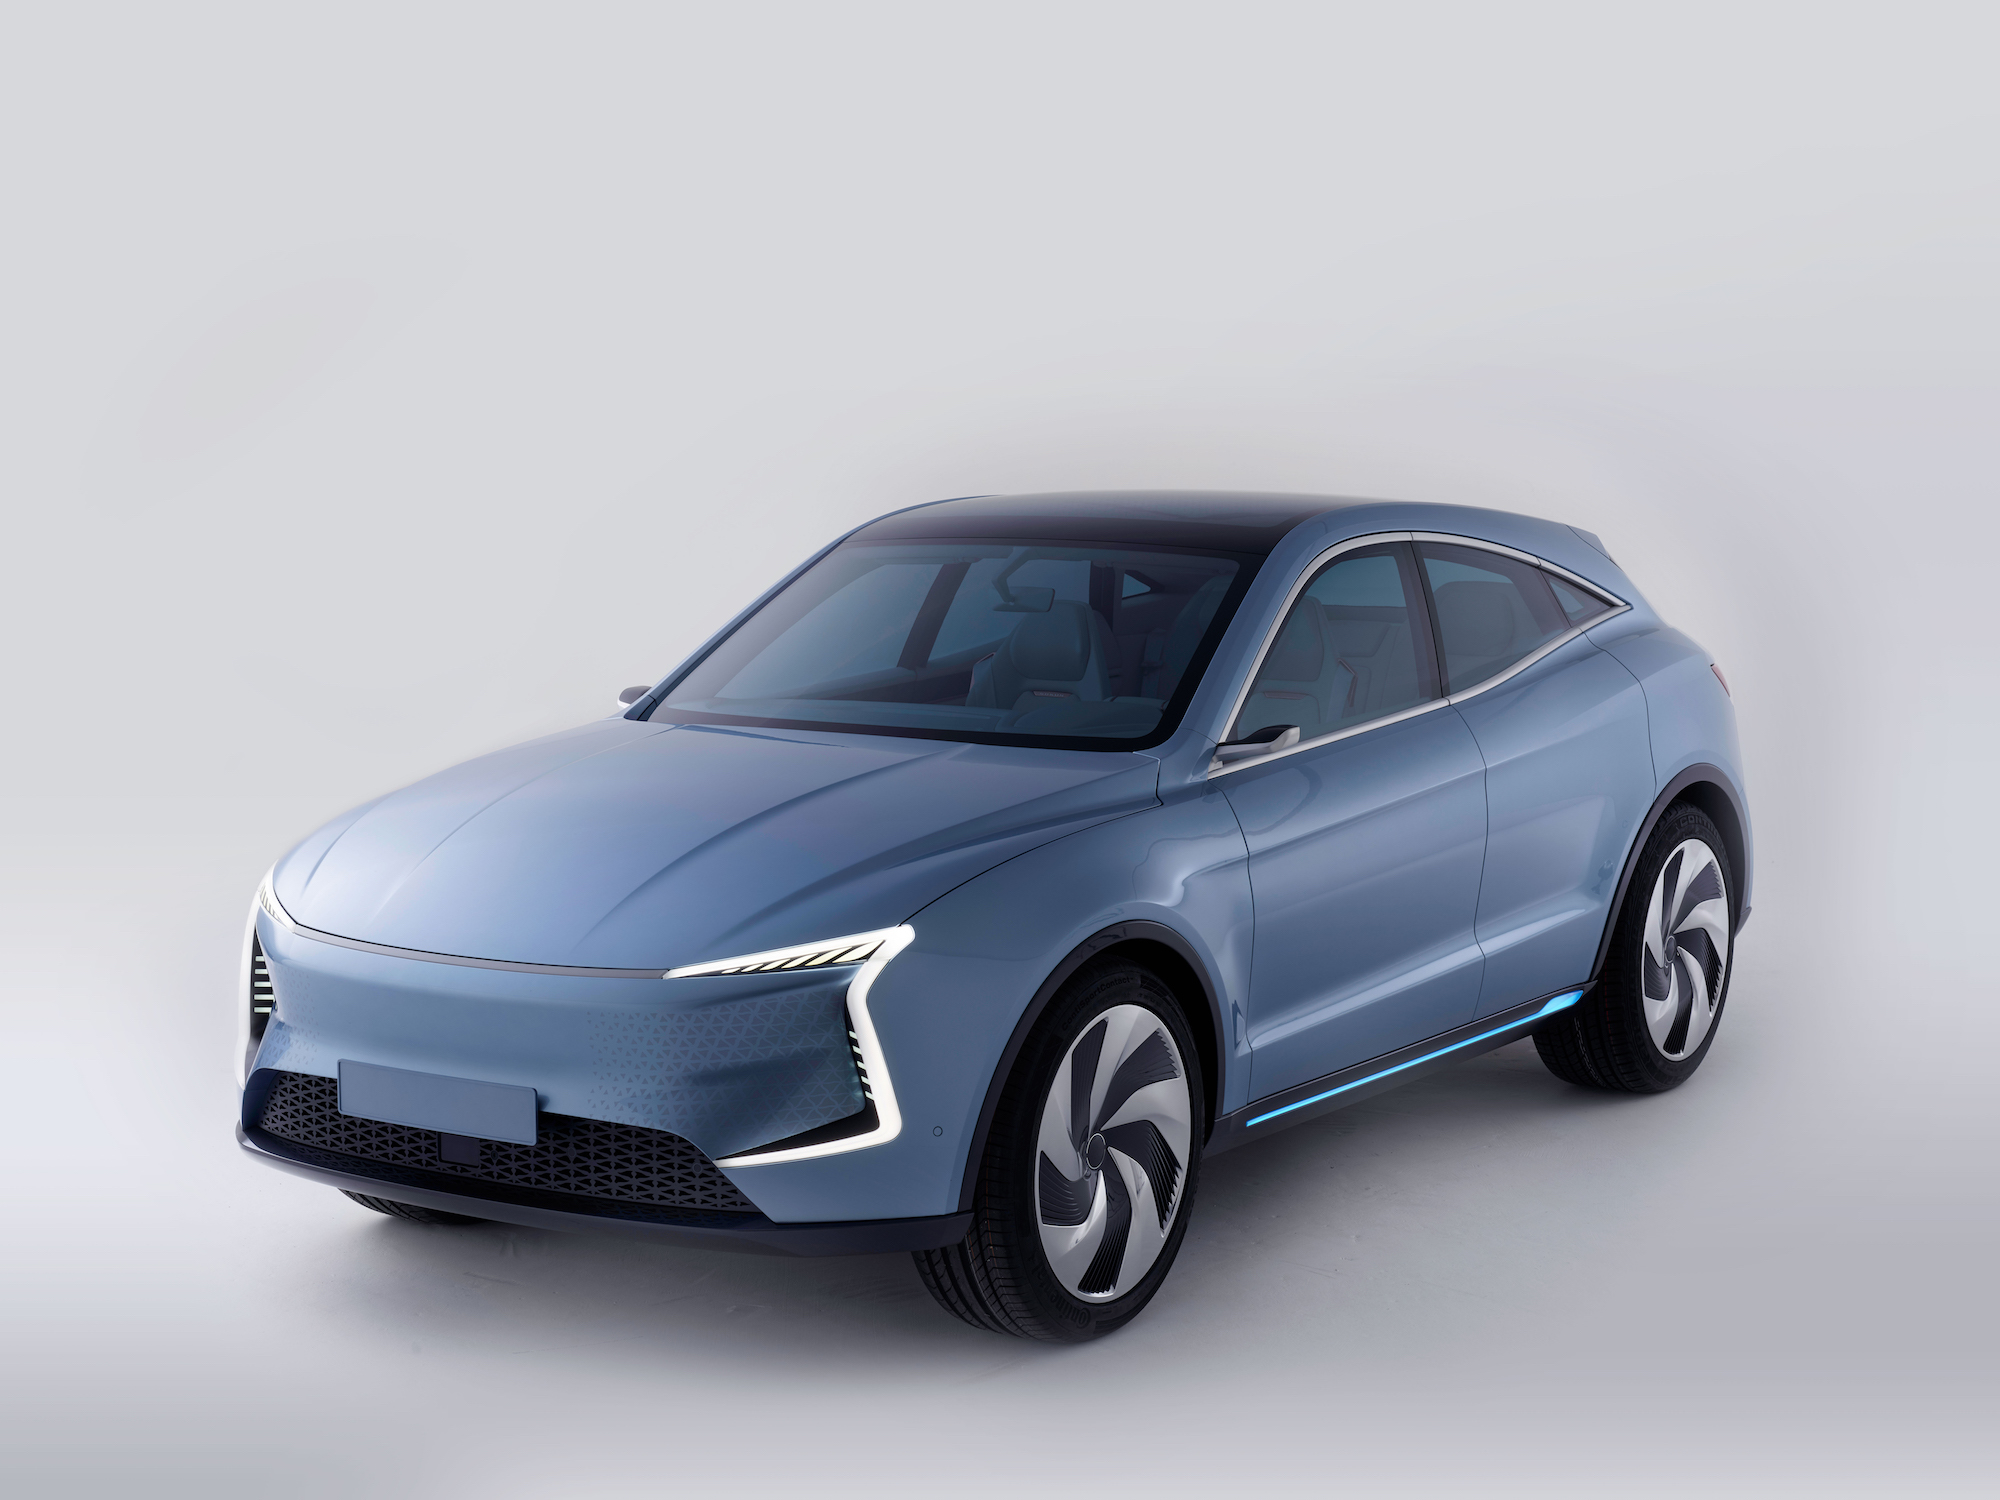 SF Motors is exactly the kind of EV startup Elon Musk complained to ...